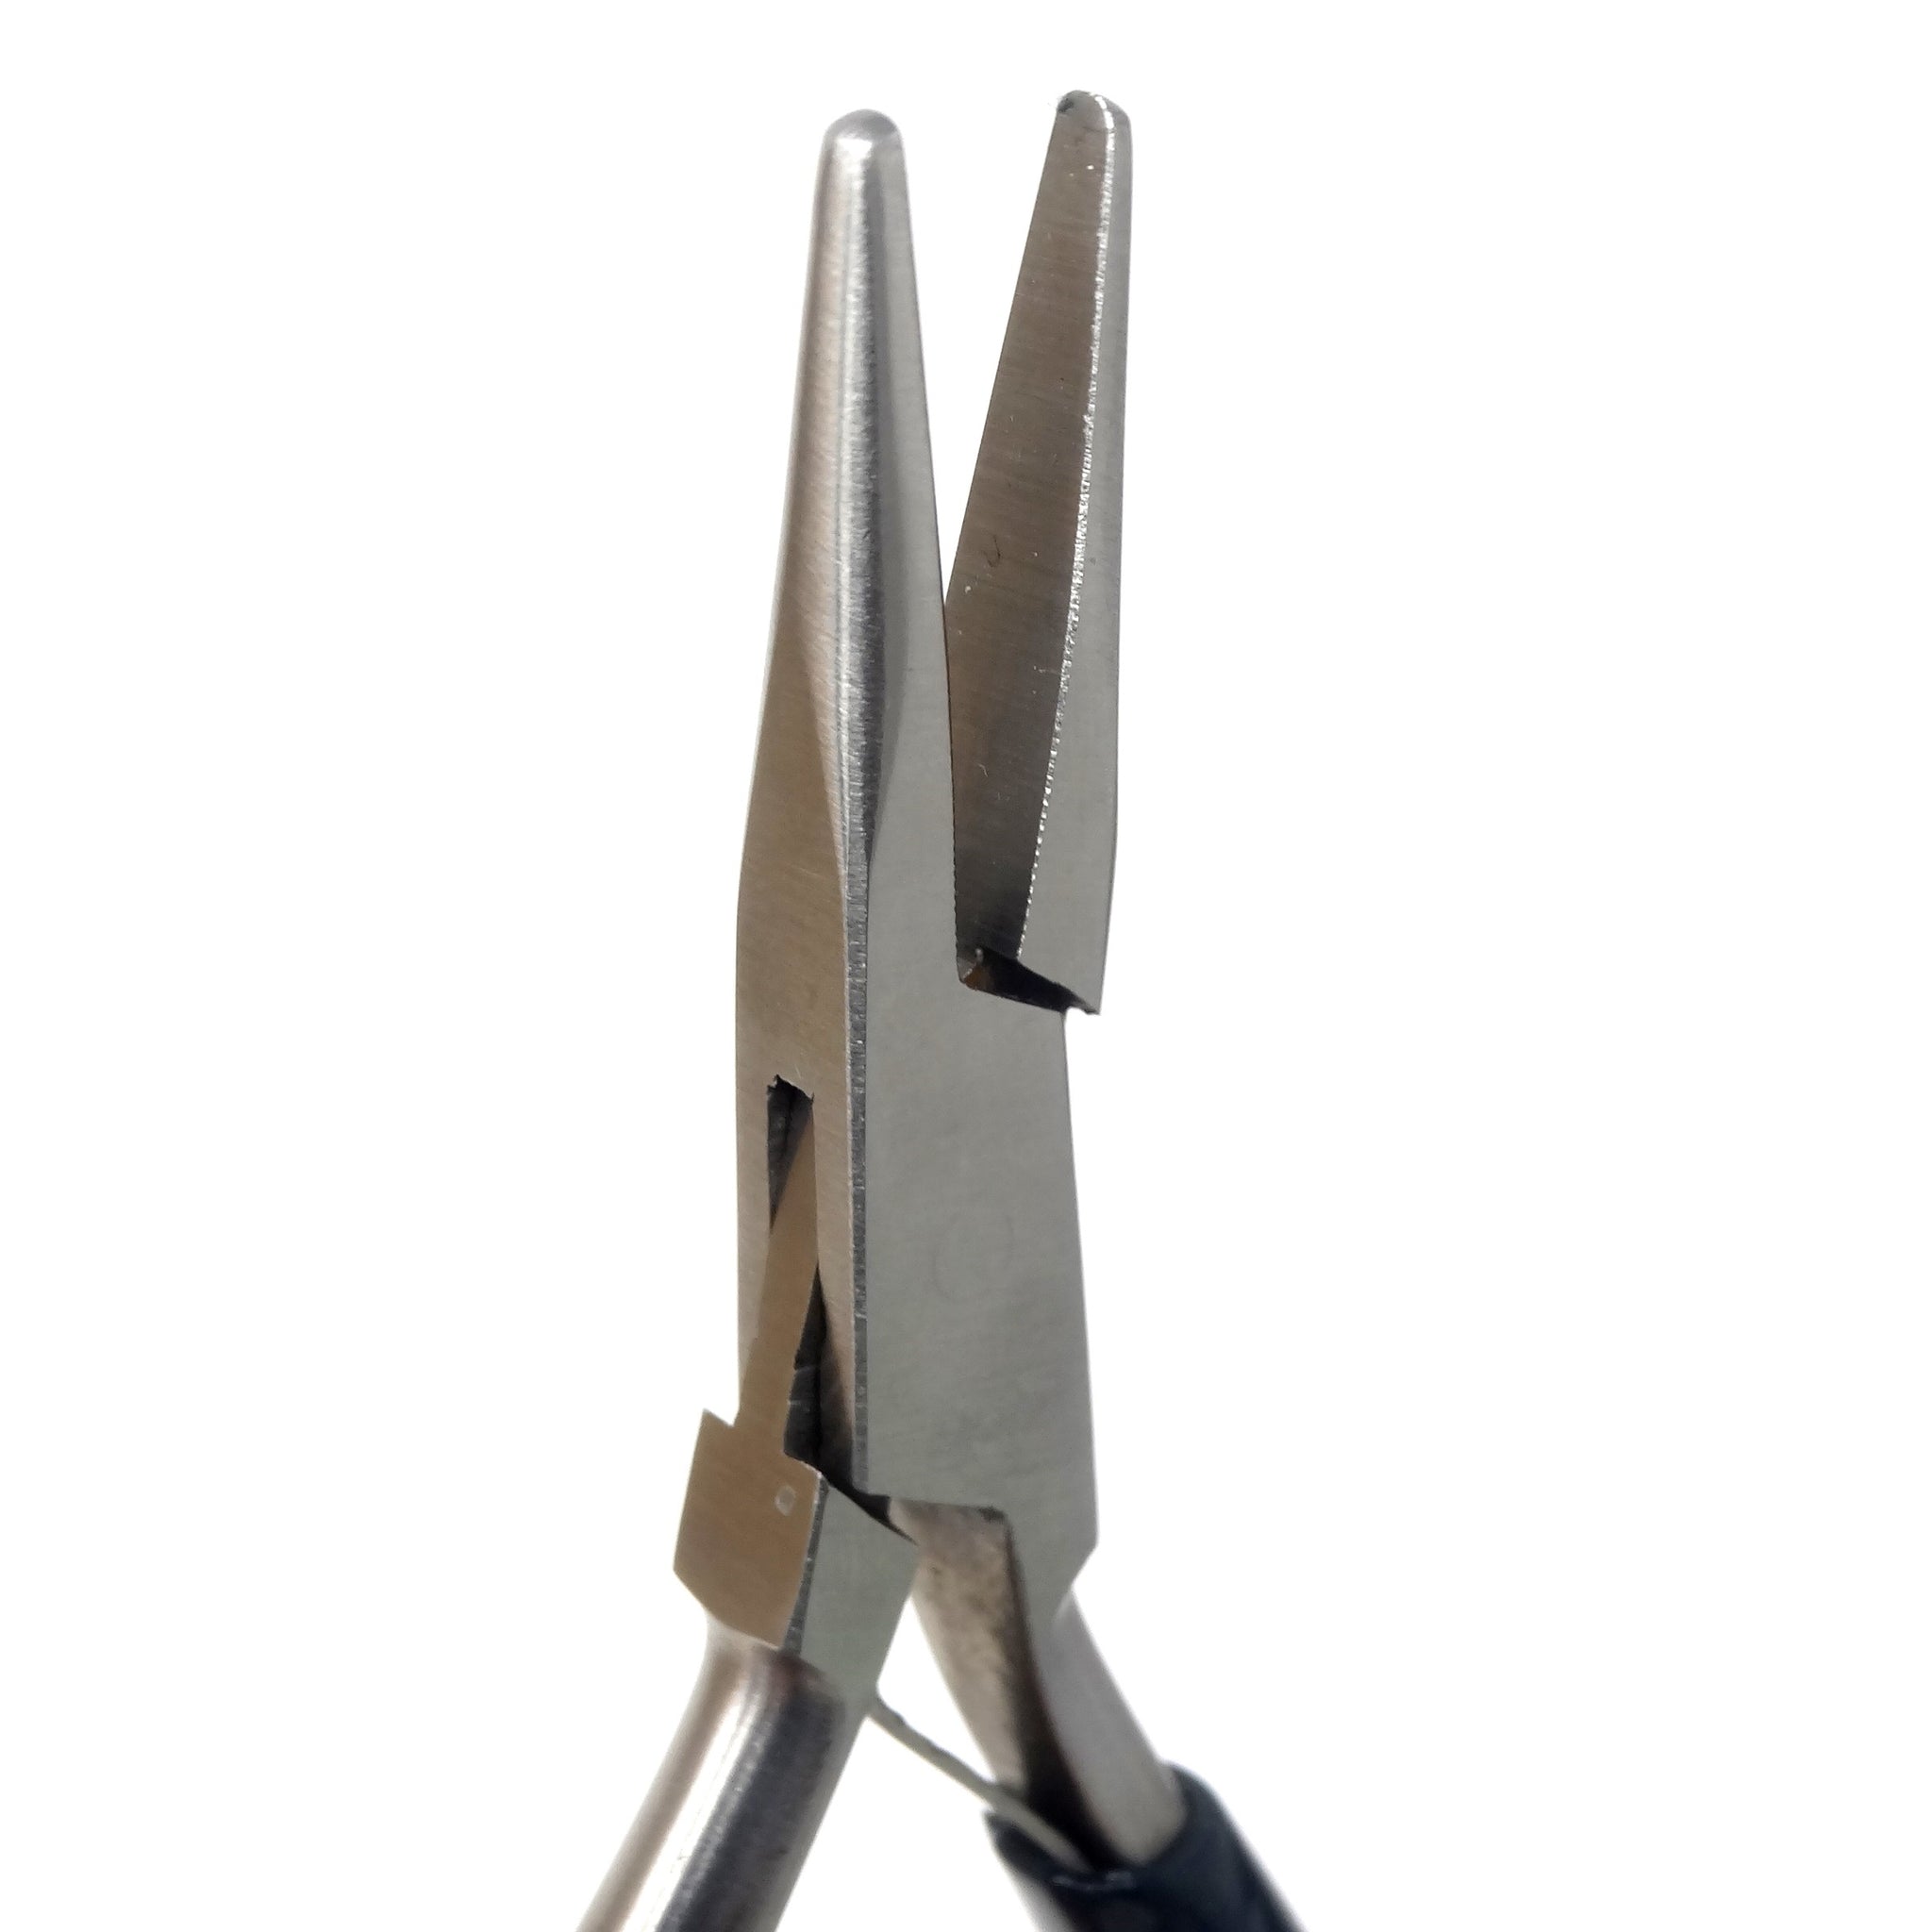 Flat Nose Professional Jewelry Pliers 4-1/2